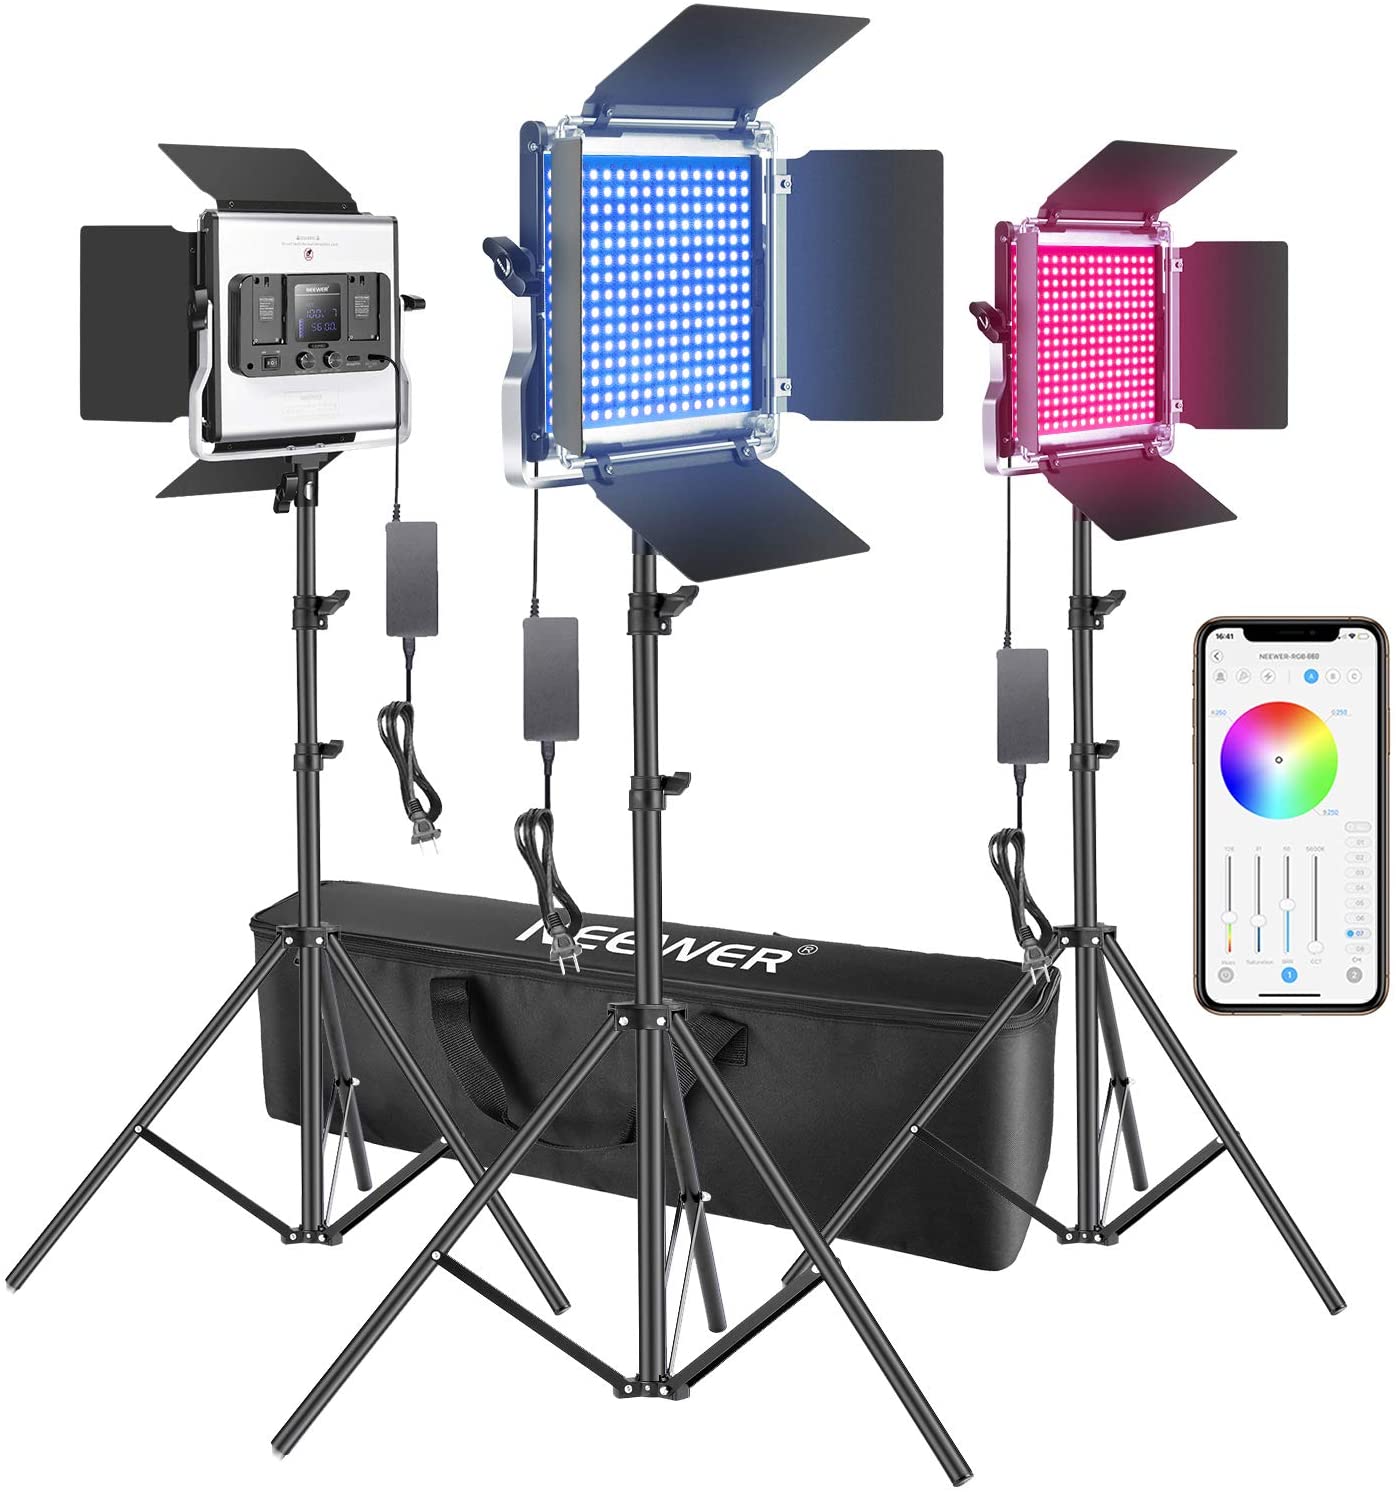 Neewer 3 Packs 660 RGB Led Light with APP Control, Photography Video Lighting Kit with Stands and Bag, 660 SMD LEDs CRI95/3200K-5600K/Brightness 0-100%/0-360 Adjustable Colors/9 Applicable Scenes